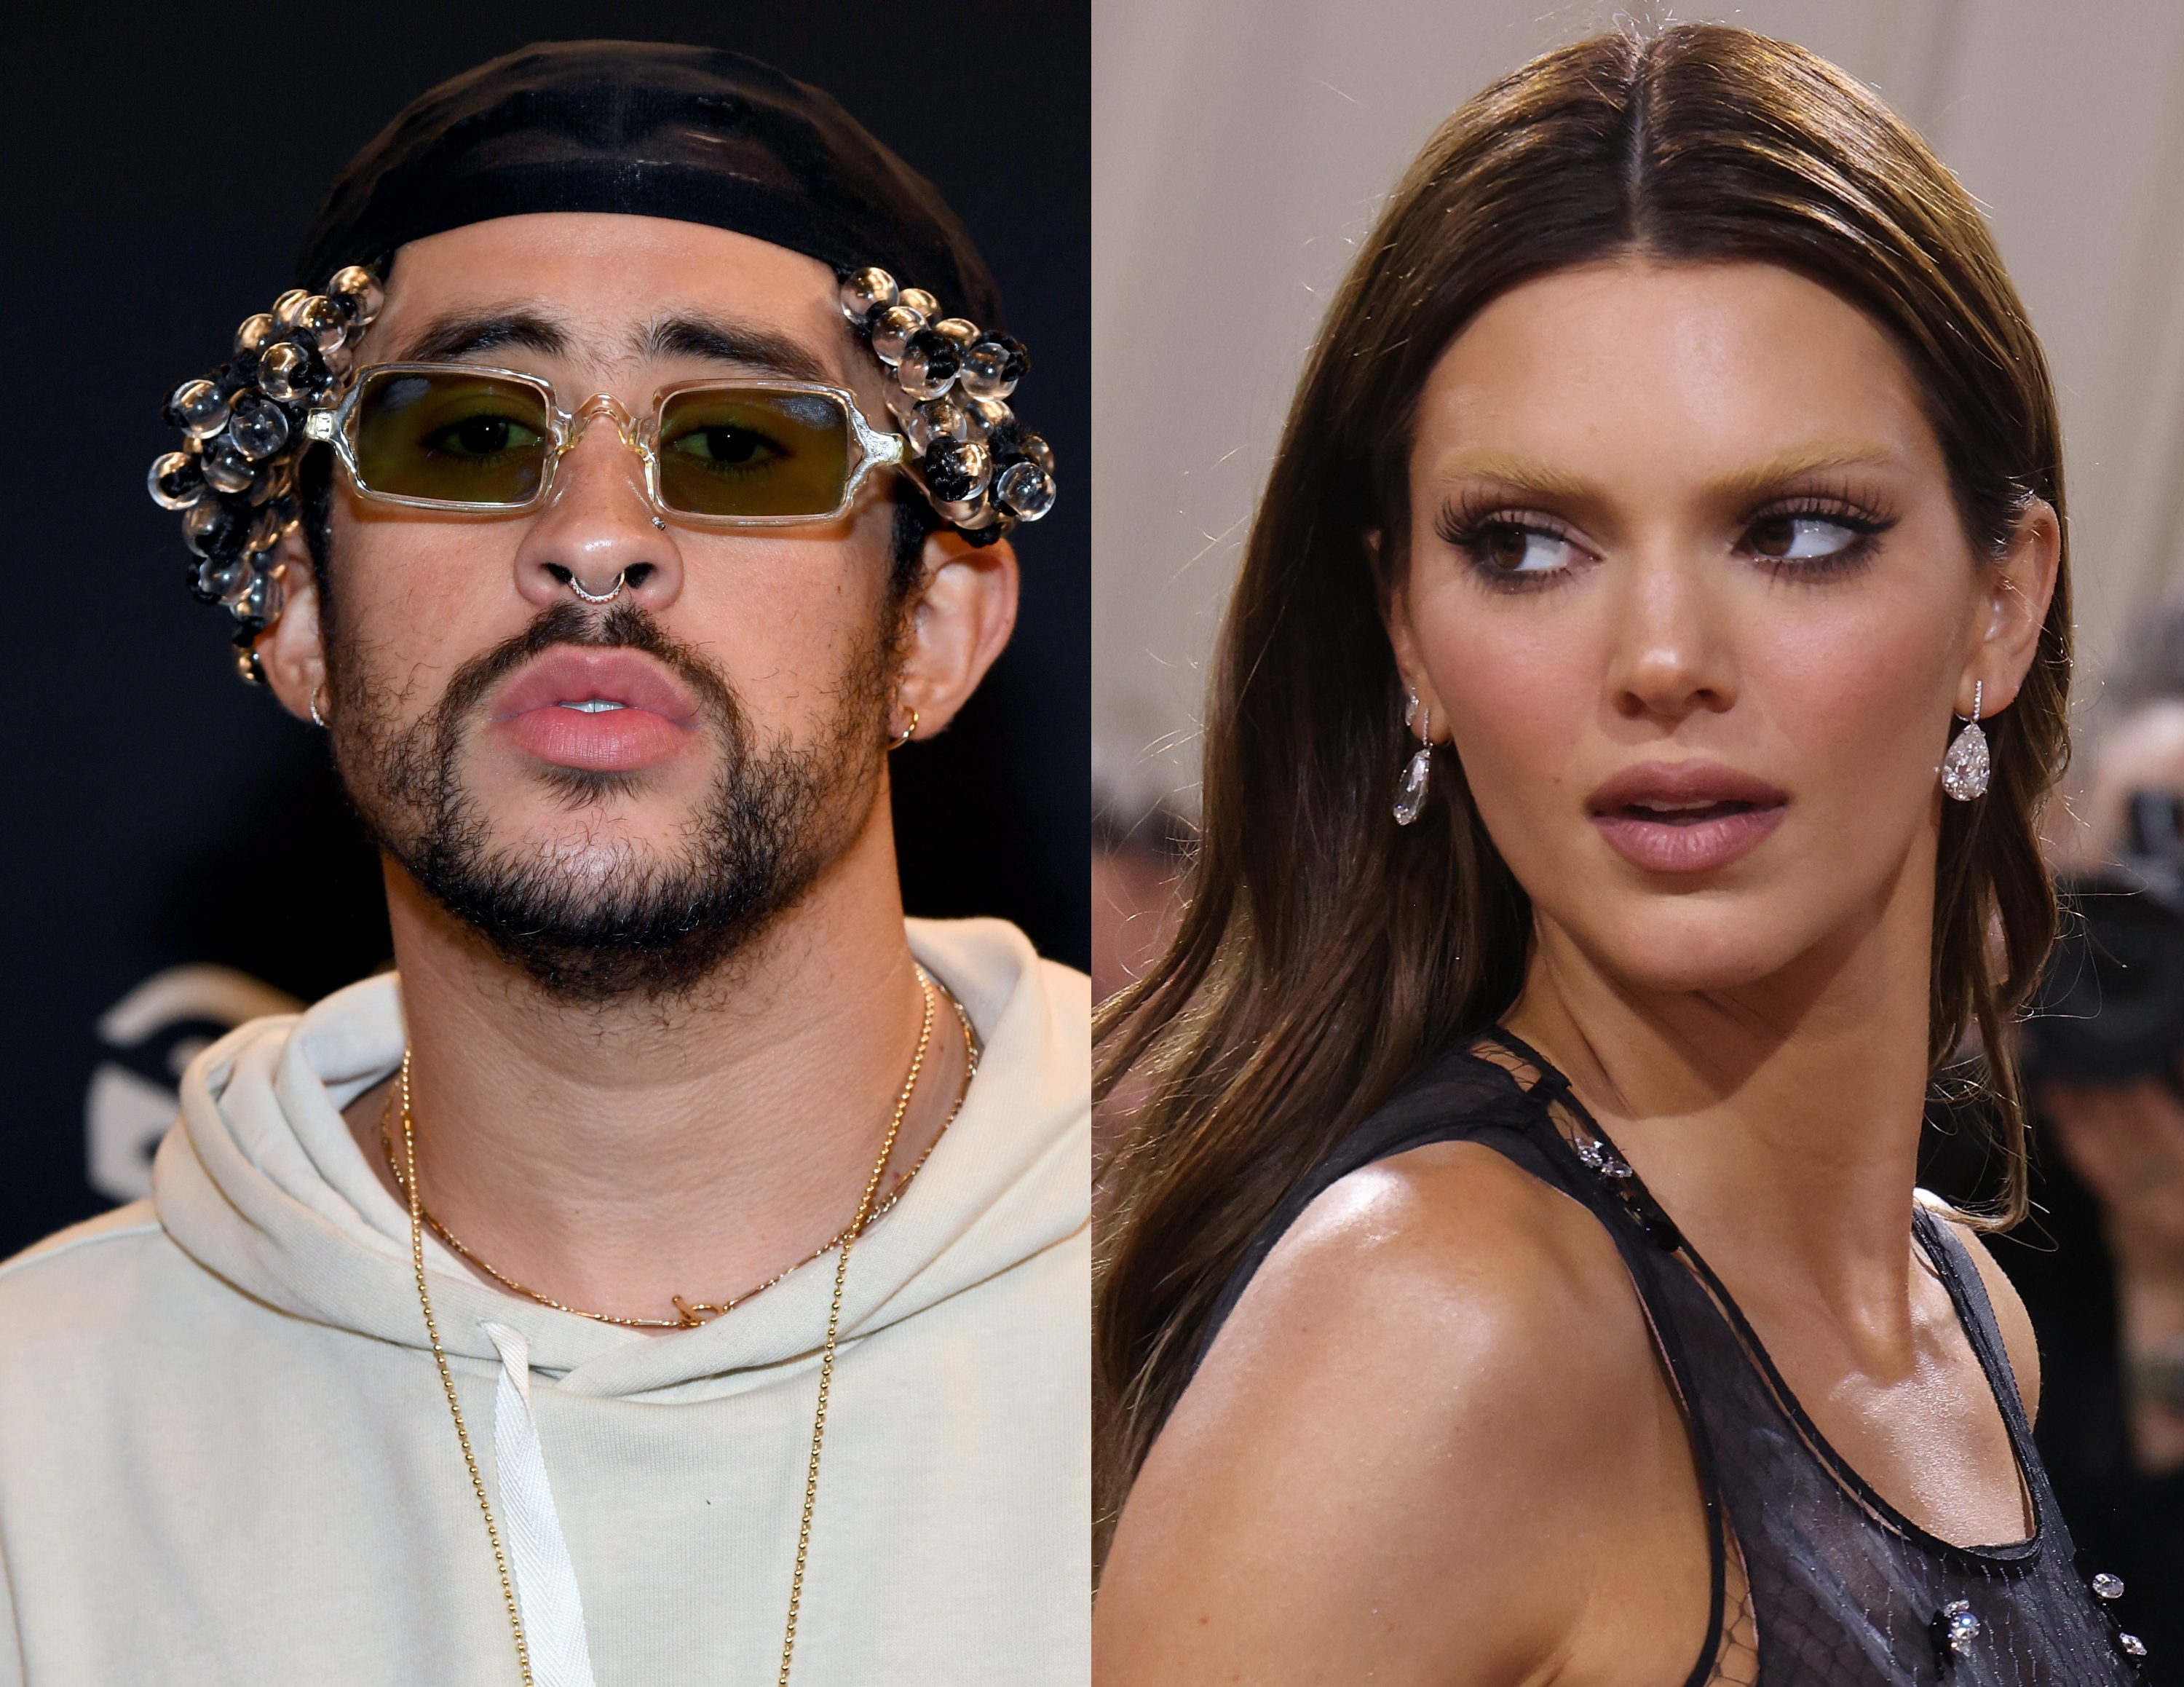 Bad Bunny & Kendall Jenner’s Latest Date Night Saw Them “Openly Kissing”